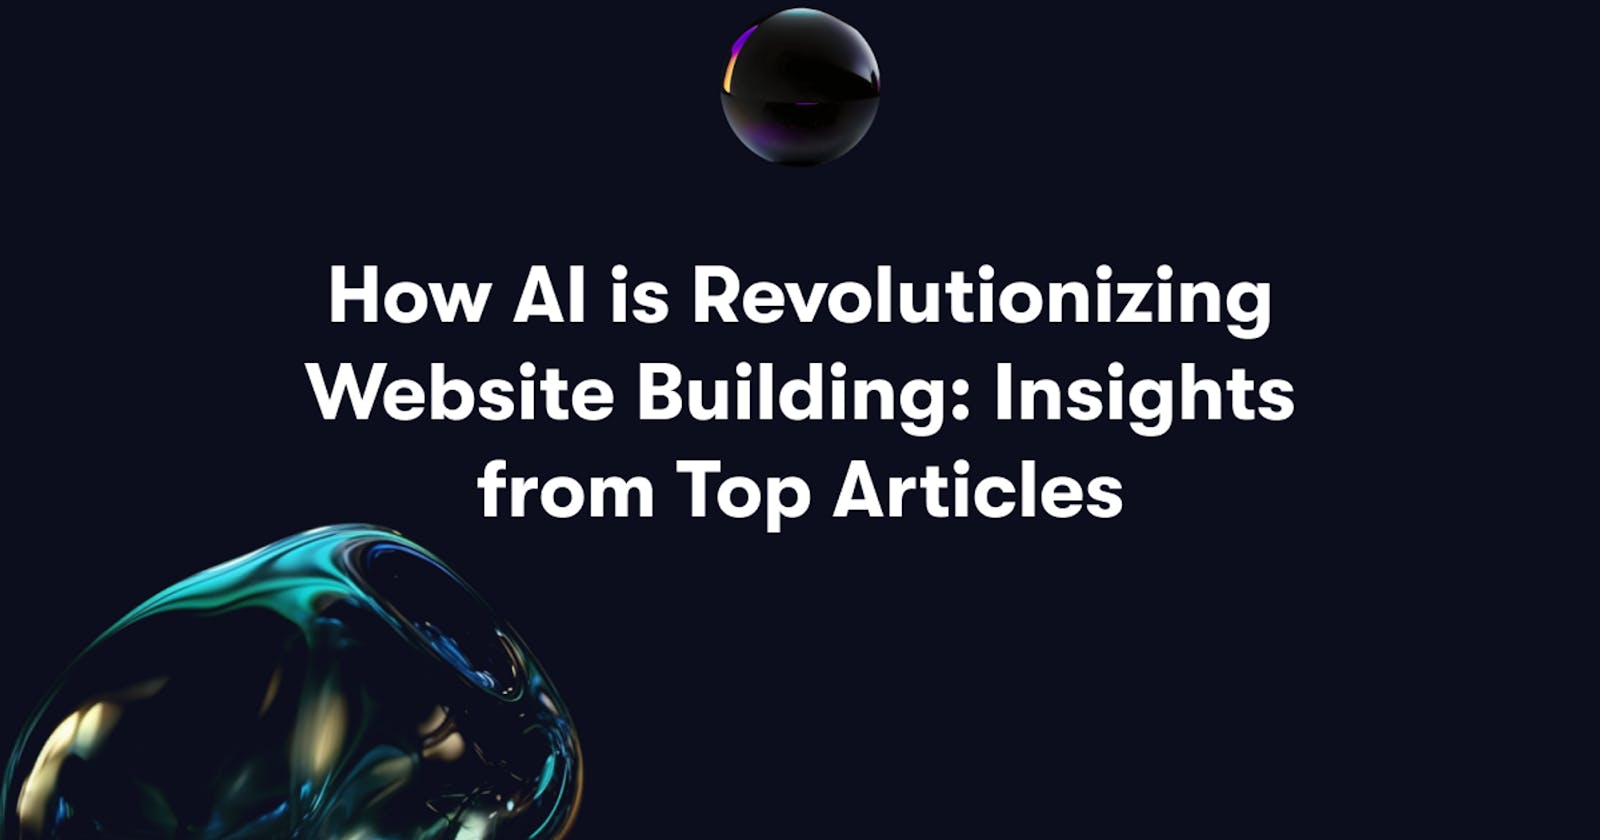 How AI is Revolutionizing Website Building: Insights from Top Articles